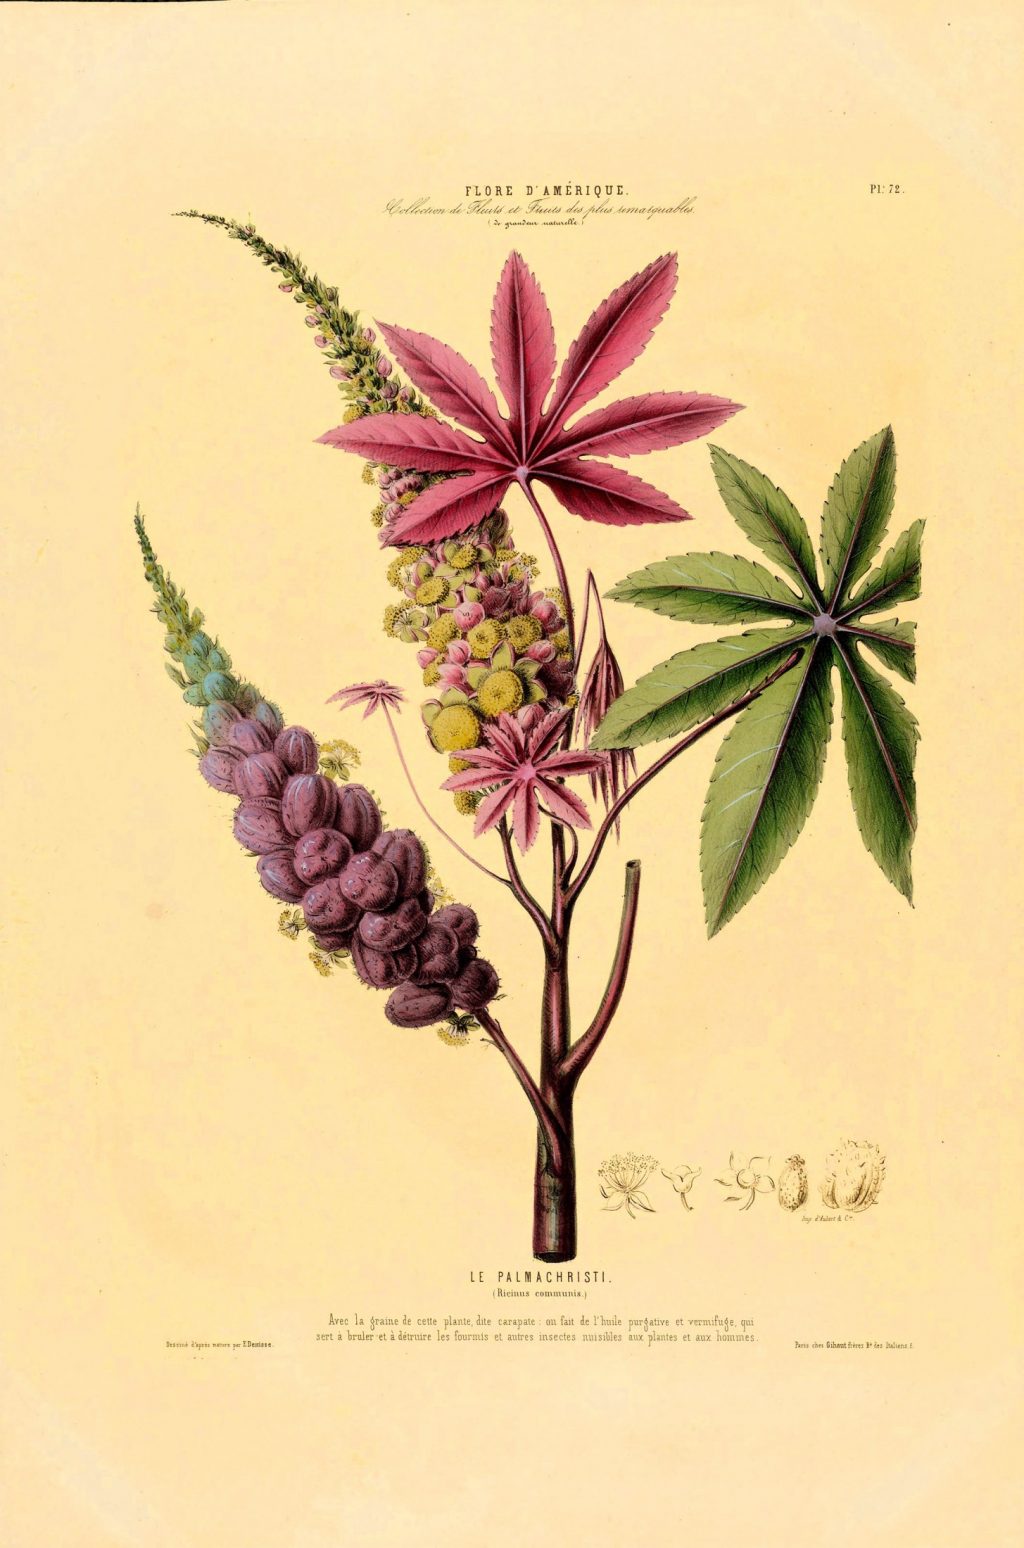 Illustration of castor bean, with large, prominent leaves, flowers, and fruits